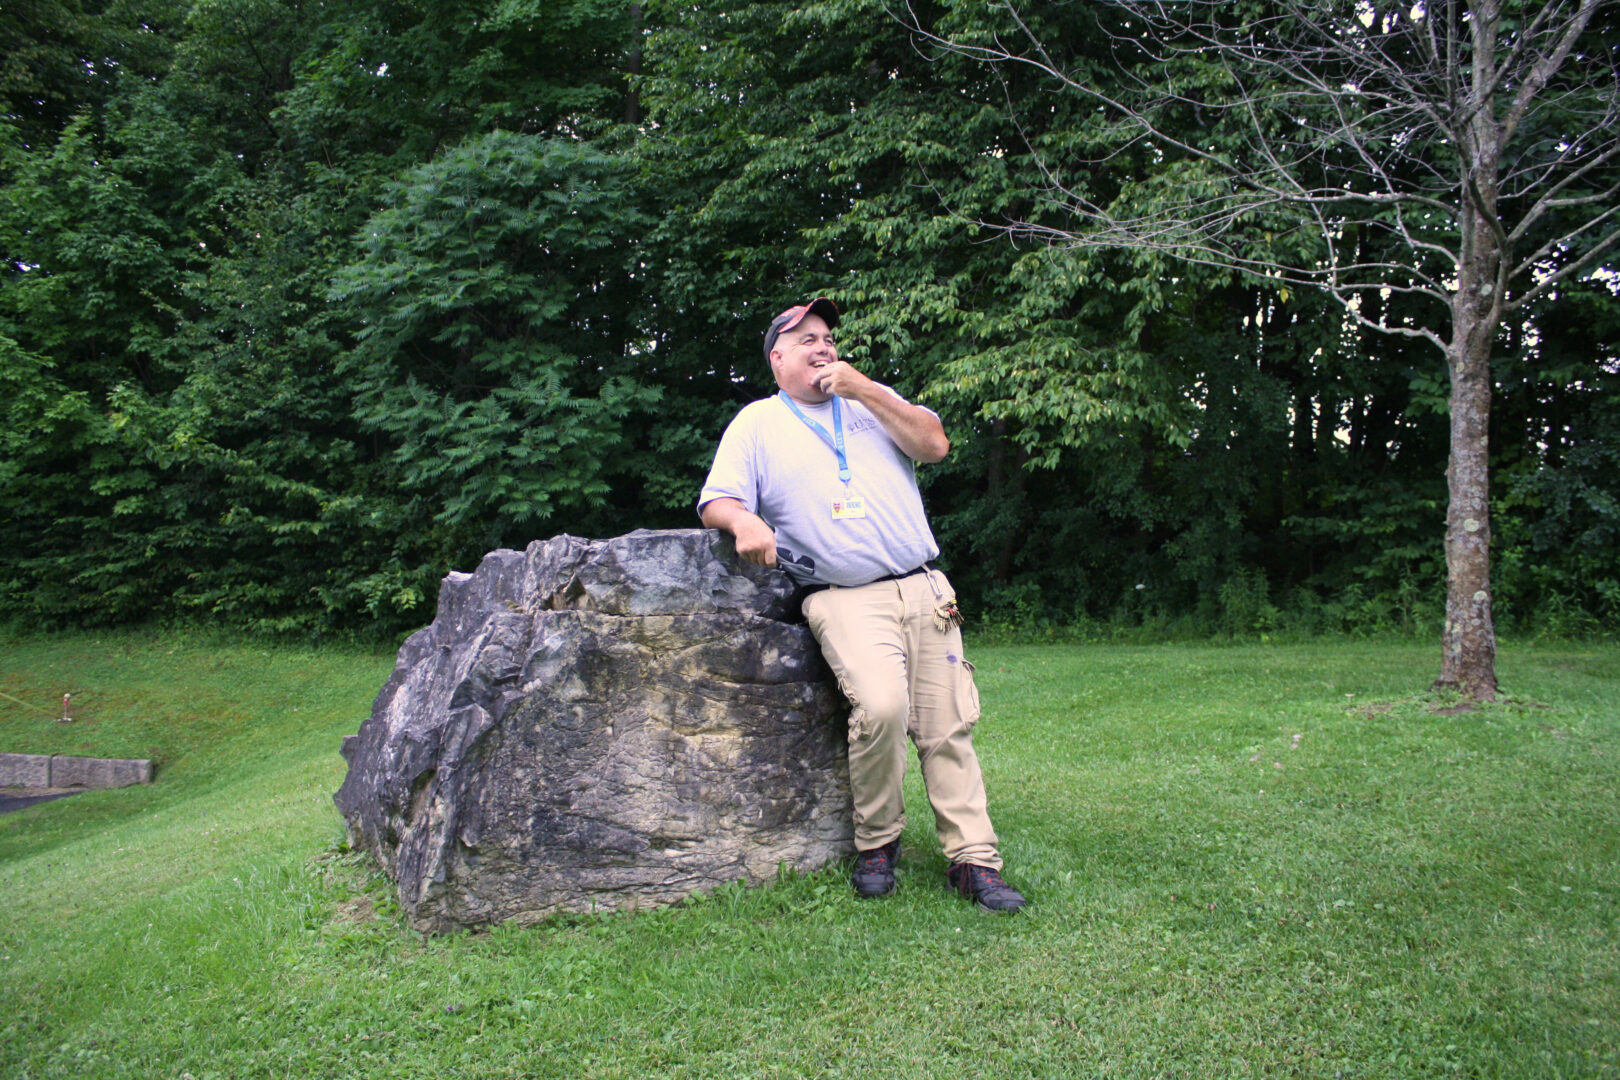 A smiling man with his left hand up to his chin leans against a boulder. Background has green grass and trees, and a small maple tree.